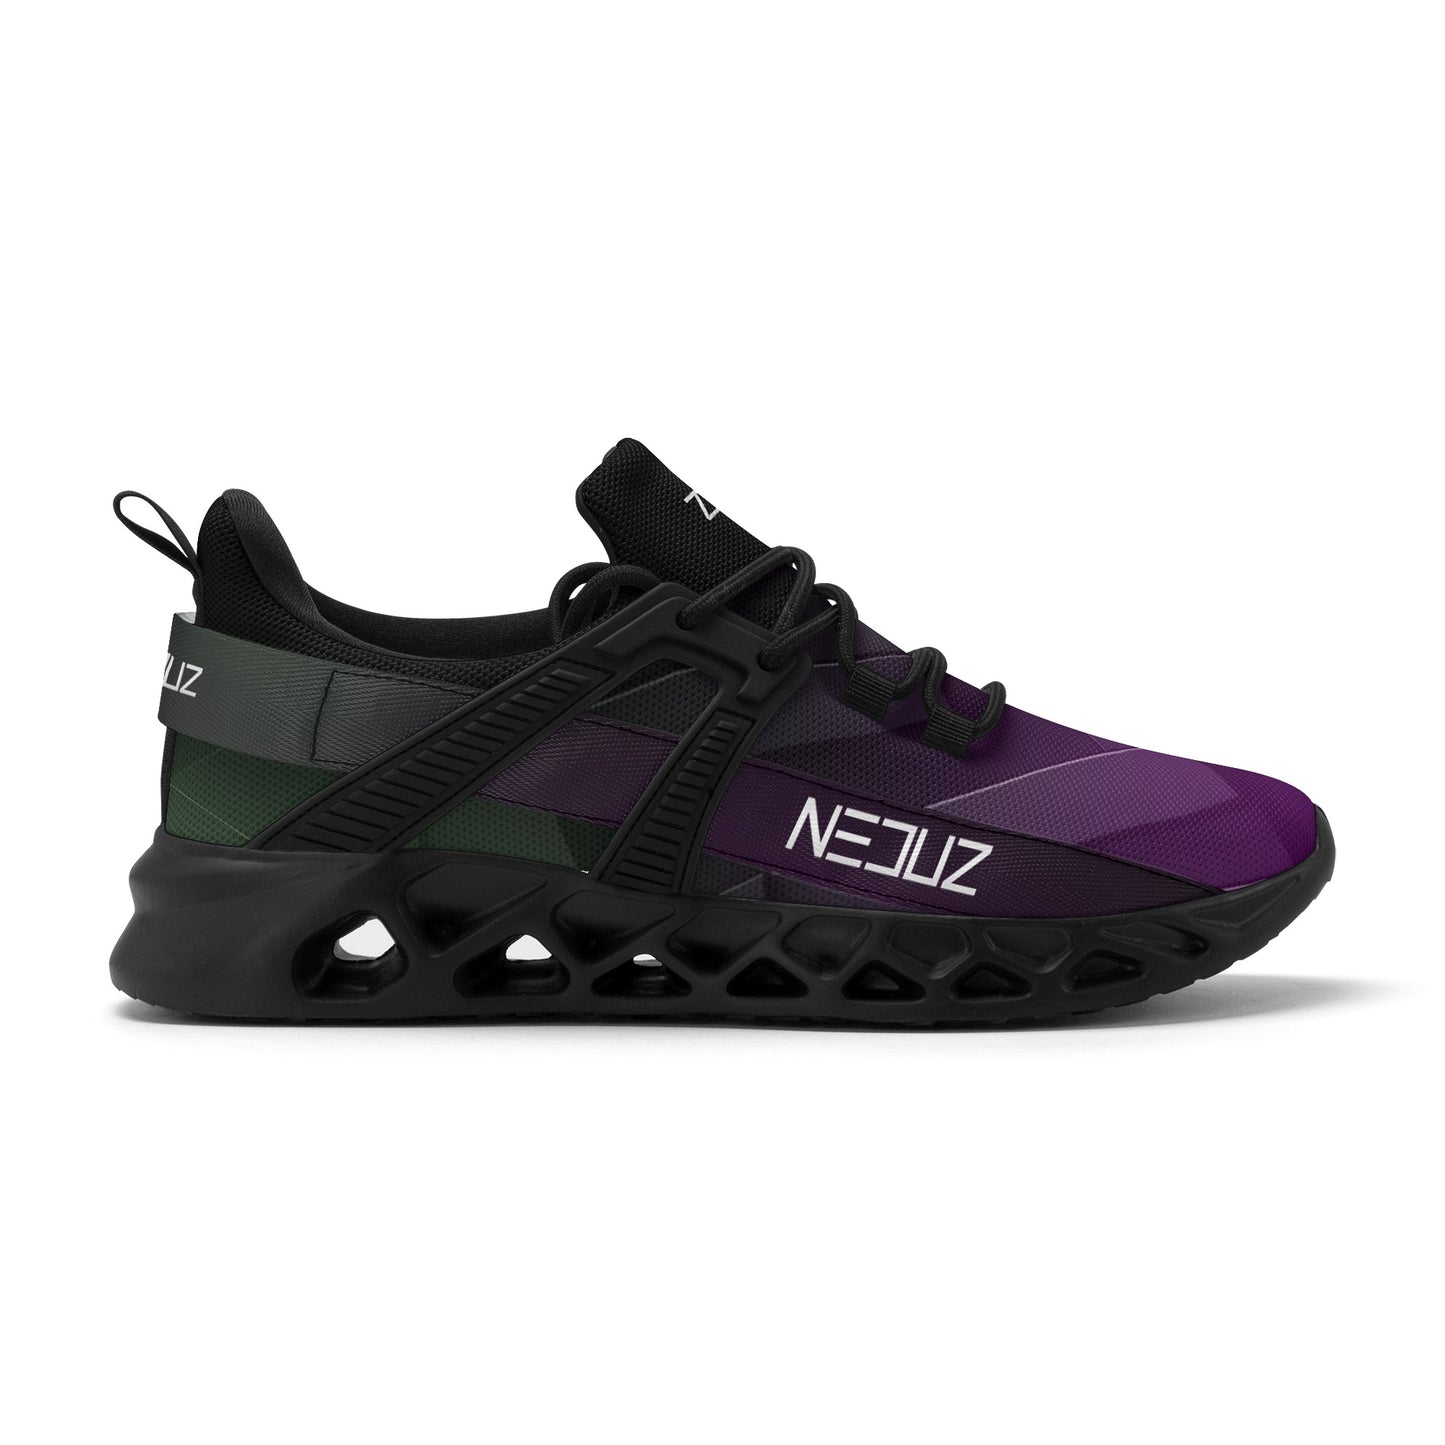 Neduz Incept Collection Elastic Sport Sneakers for Men - Breathable, Durable, All-Season Wear